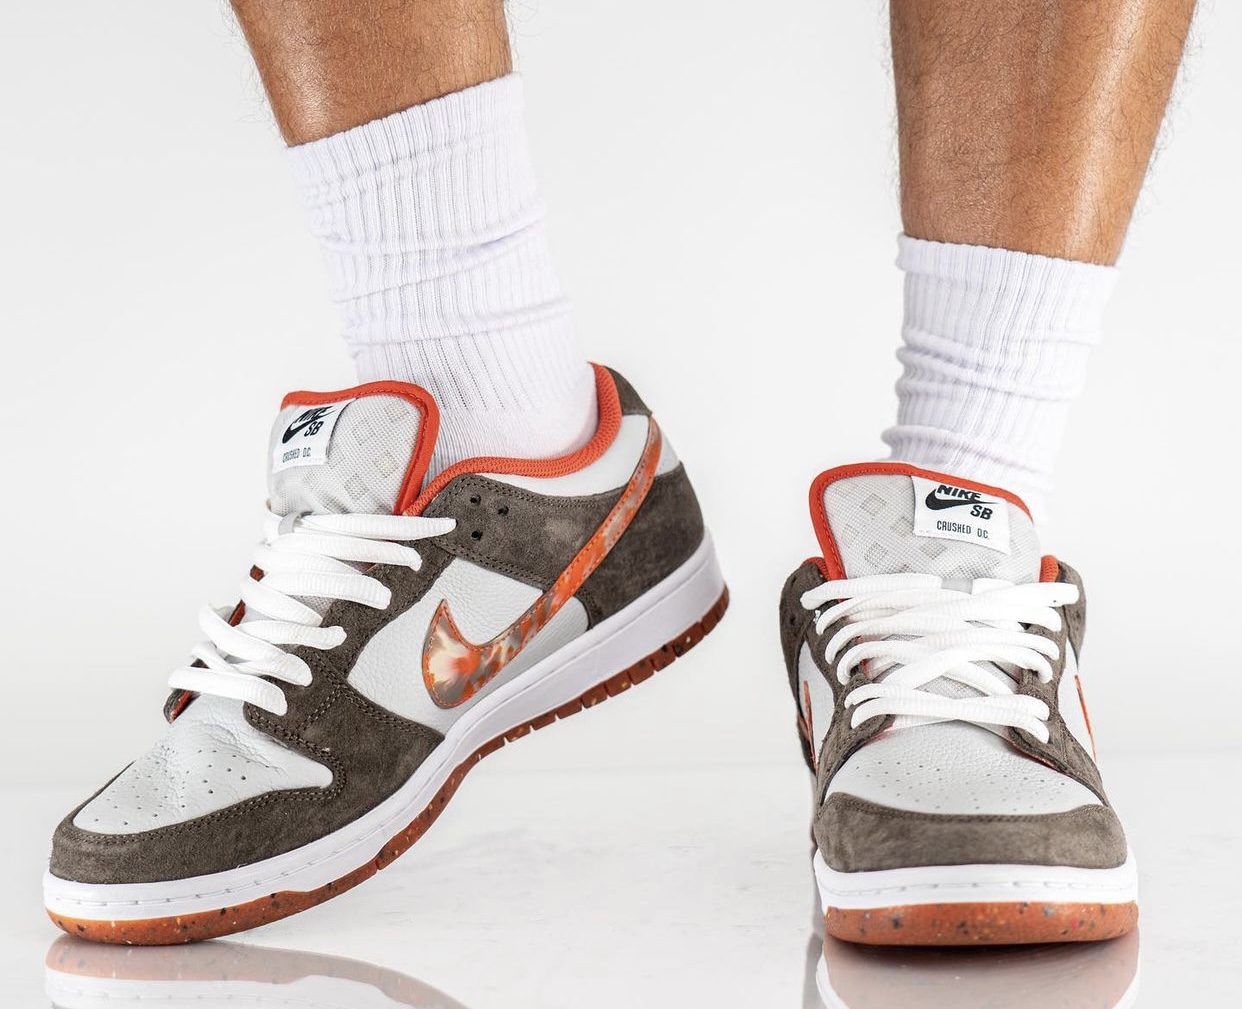 Where to Buy The Crushed D.C. x Nike SB Dunk Low “Golden Hour” - The Elite